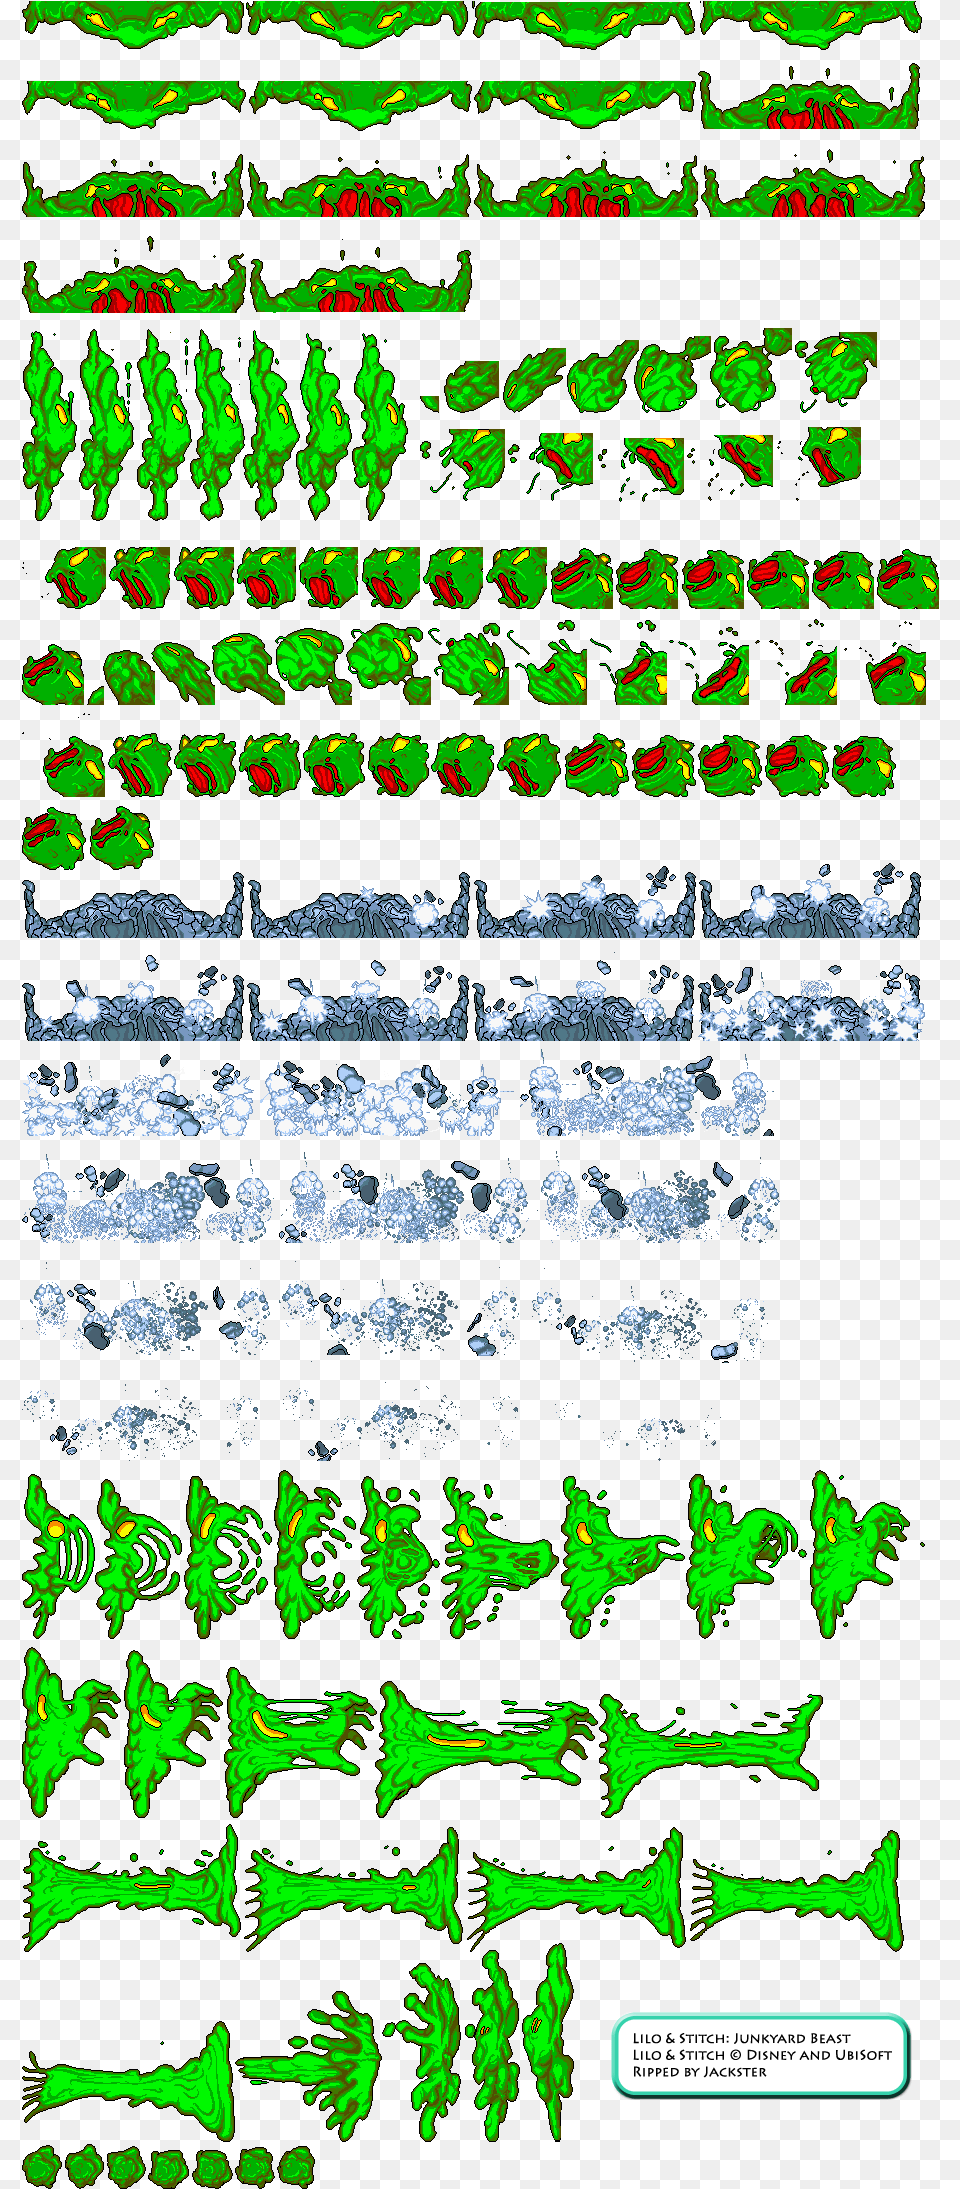 Click For Full Sized Junkyard Beast Lilo And Stitch Sprites, Green, Nature, Outdoors, Advertisement Png